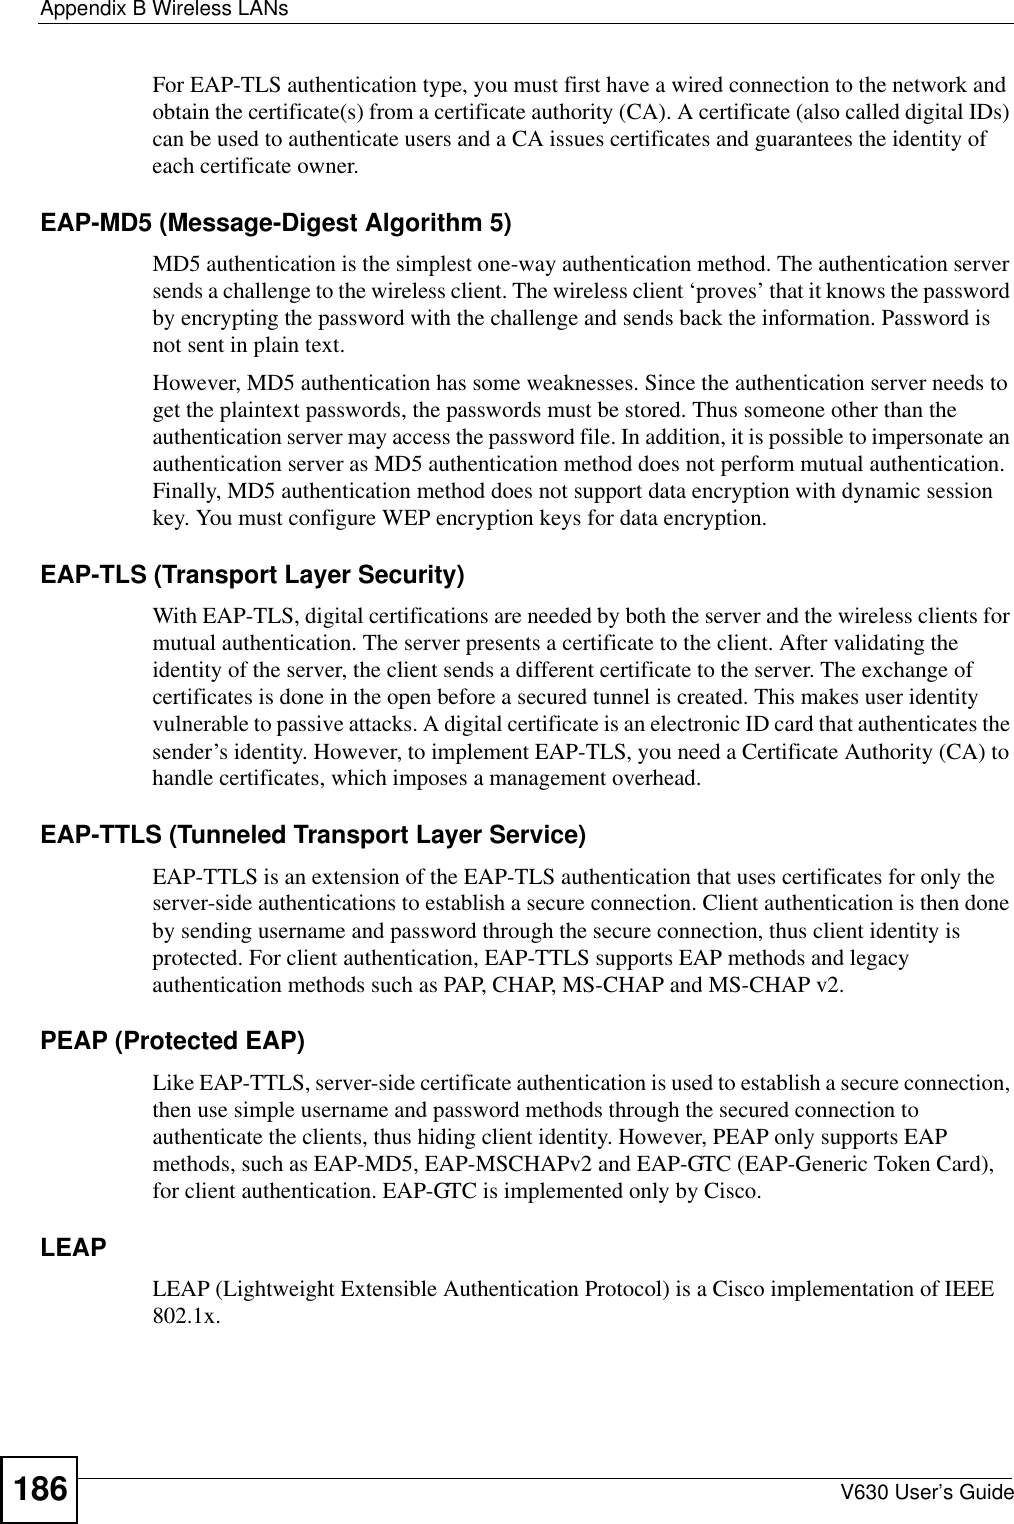 Appendix B Wireless LANsV630 User’s Guide186For EAP-TLS authentication type, you must first have a wired connection to the network and obtain the certificate(s) from a certificate authority (CA). A certificate (also called digital IDs) can be used to authenticate users and a CA issues certificates and guarantees the identity of each certificate owner.EAP-MD5 (Message-Digest Algorithm 5)MD5 authentication is the simplest one-way authentication method. The authentication server sends a challenge to the wireless client. The wireless client ‘proves’ that it knows the password by encrypting the password with the challenge and sends back the information. Password is not sent in plain text. However, MD5 authentication has some weaknesses. Since the authentication server needs to get the plaintext passwords, the passwords must be stored. Thus someone other than the authentication server may access the password file. In addition, it is possible to impersonate an authentication server as MD5 authentication method does not perform mutual authentication. Finally, MD5 authentication method does not support data encryption with dynamic session key. You must configure WEP encryption keys for data encryption. EAP-TLS (Transport Layer Security)With EAP-TLS, digital certifications are needed by both the server and the wireless clients for mutual authentication. The server presents a certificate to the client. After validating the identity of the server, the client sends a different certificate to the server. The exchange of certificates is done in the open before a secured tunnel is created. This makes user identity vulnerable to passive attacks. A digital certificate is an electronic ID card that authenticates the sender’s identity. However, to implement EAP-TLS, you need a Certificate Authority (CA) to handle certificates, which imposes a management overhead. EAP-TTLS (Tunneled Transport Layer Service) EAP-TTLS is an extension of the EAP-TLS authentication that uses certificates for only the server-side authentications to establish a secure connection. Client authentication is then done by sending username and password through the secure connection, thus client identity is protected. For client authentication, EAP-TTLS supports EAP methods and legacy authentication methods such as PAP, CHAP, MS-CHAP and MS-CHAP v2. PEAP (Protected EAP)   Like EAP-TTLS, server-side certificate authentication is used to establish a secure connection, then use simple username and password methods through the secured connection to authenticate the clients, thus hiding client identity. However, PEAP only supports EAP methods, such as EAP-MD5, EAP-MSCHAPv2 and EAP-GTC (EAP-Generic Token Card), for client authentication. EAP-GTC is implemented only by Cisco.LEAPLEAP (Lightweight Extensible Authentication Protocol) is a Cisco implementation of IEEE 802.1x. 